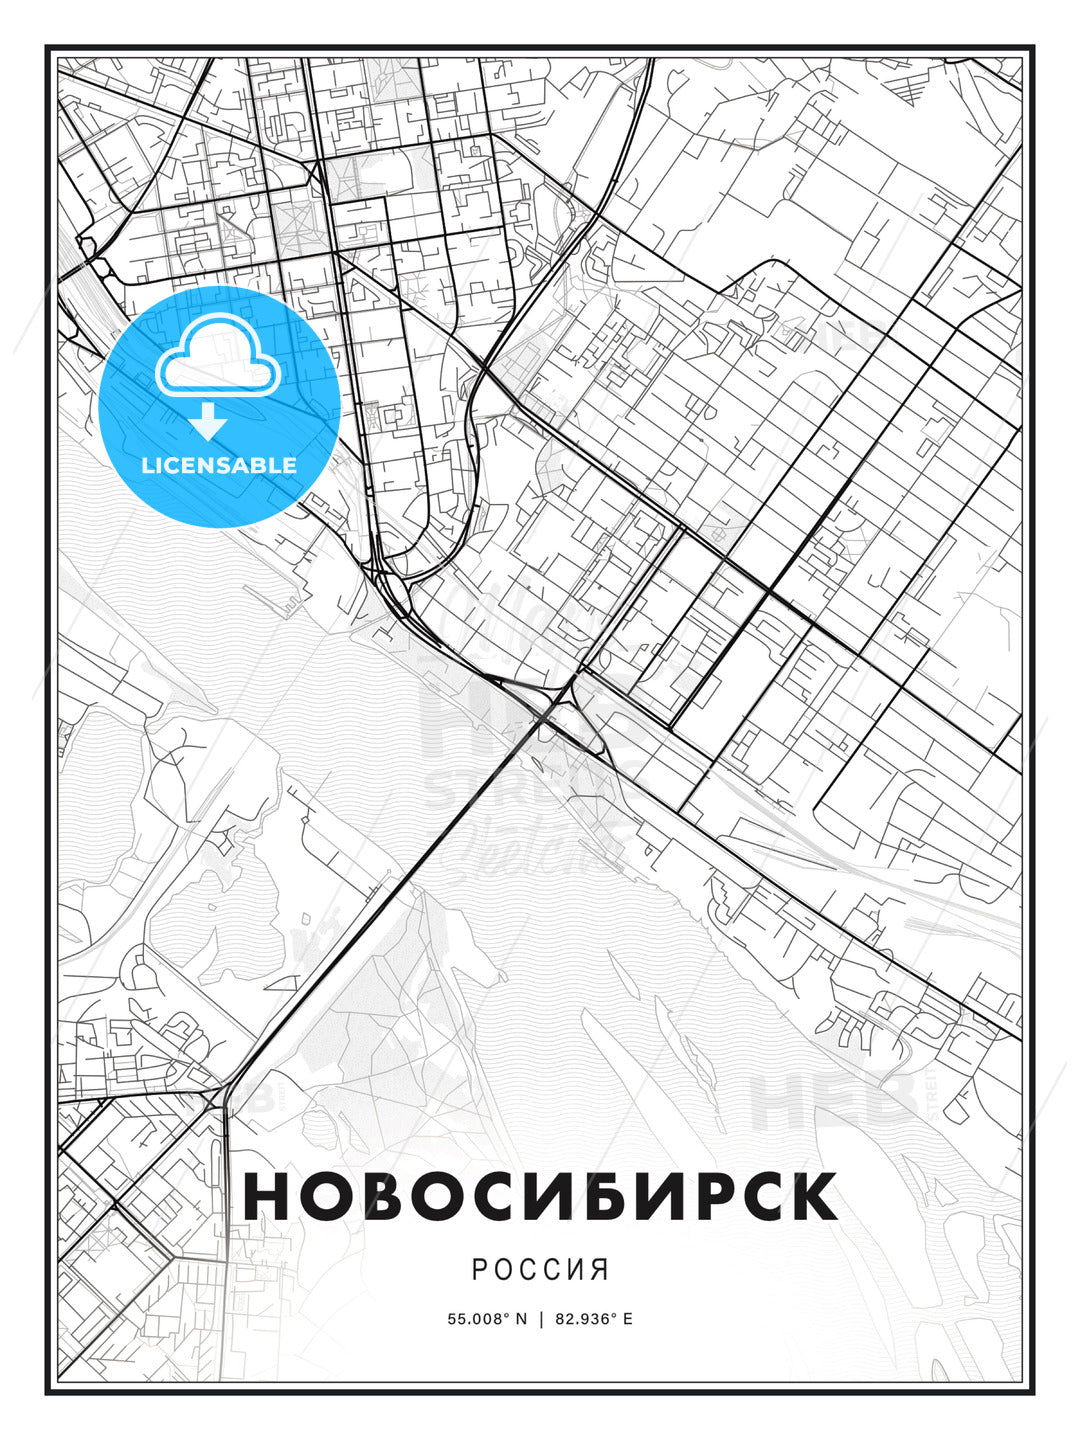 НОВОСИБИРСК / Novosibirsk, Russia, Modern Print Template in Various Formats - HEBSTREITS Sketches